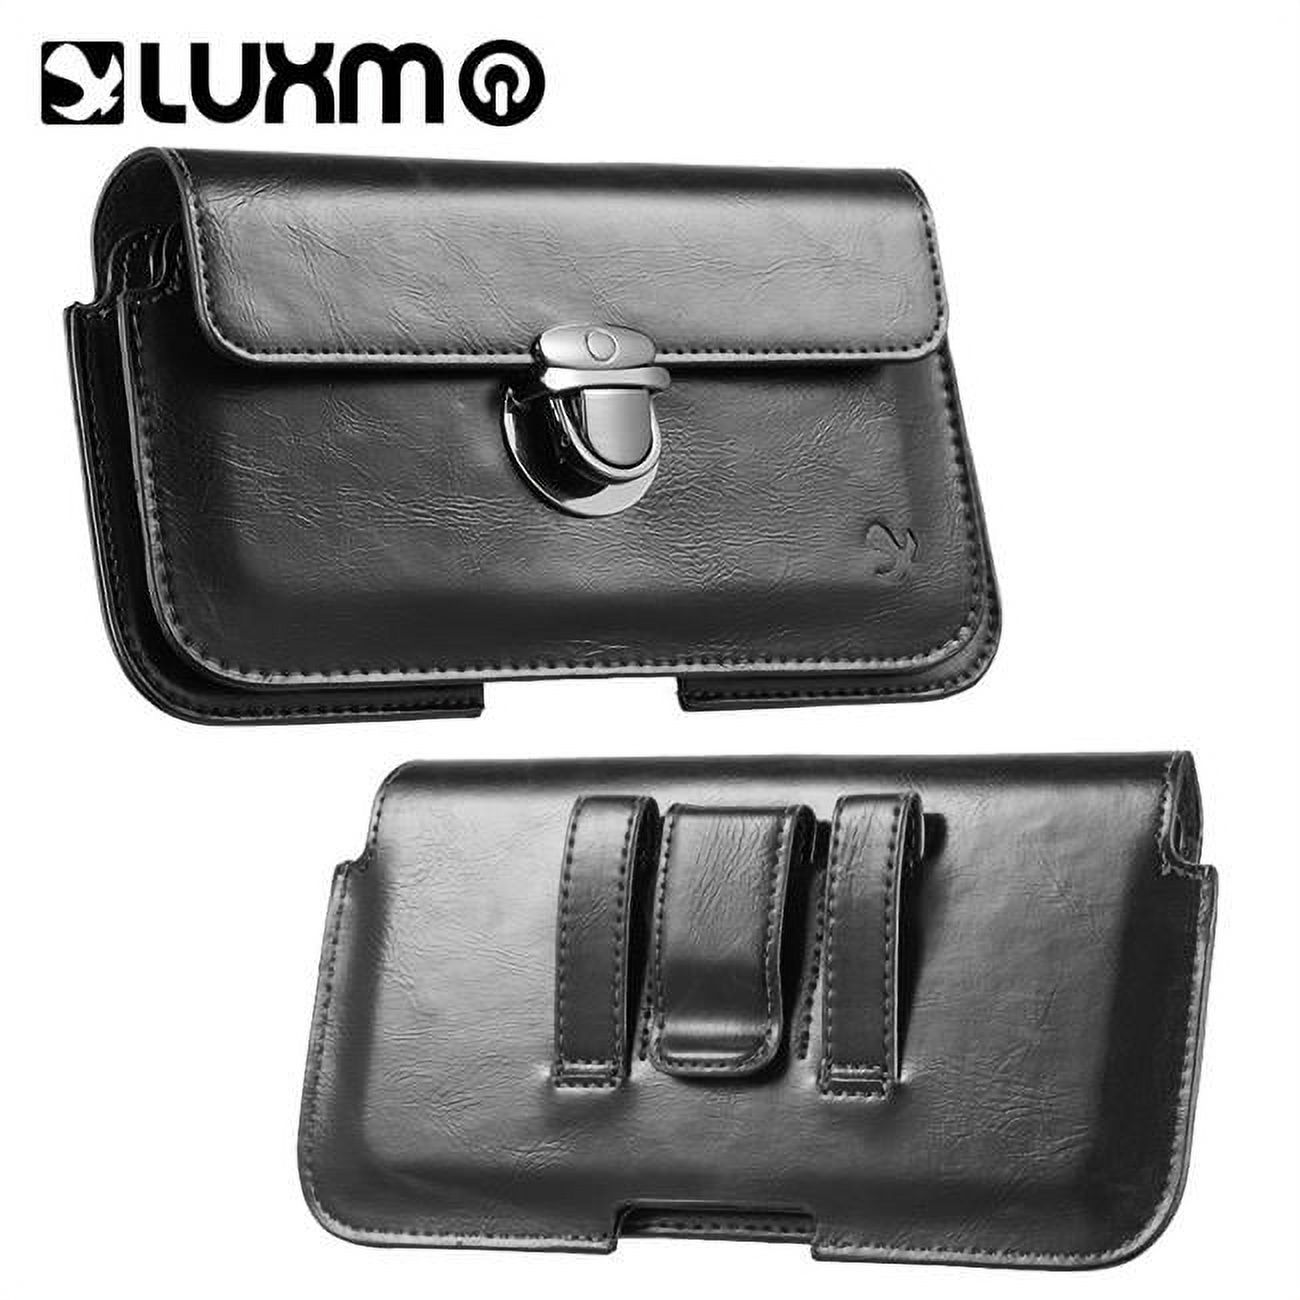 LUXMO #28 GALAXY NOTE /I717/5.7" UNIVERSAL LEATHER POUCH BLACK-PLASTIC PACKAGING - image 1 of 8